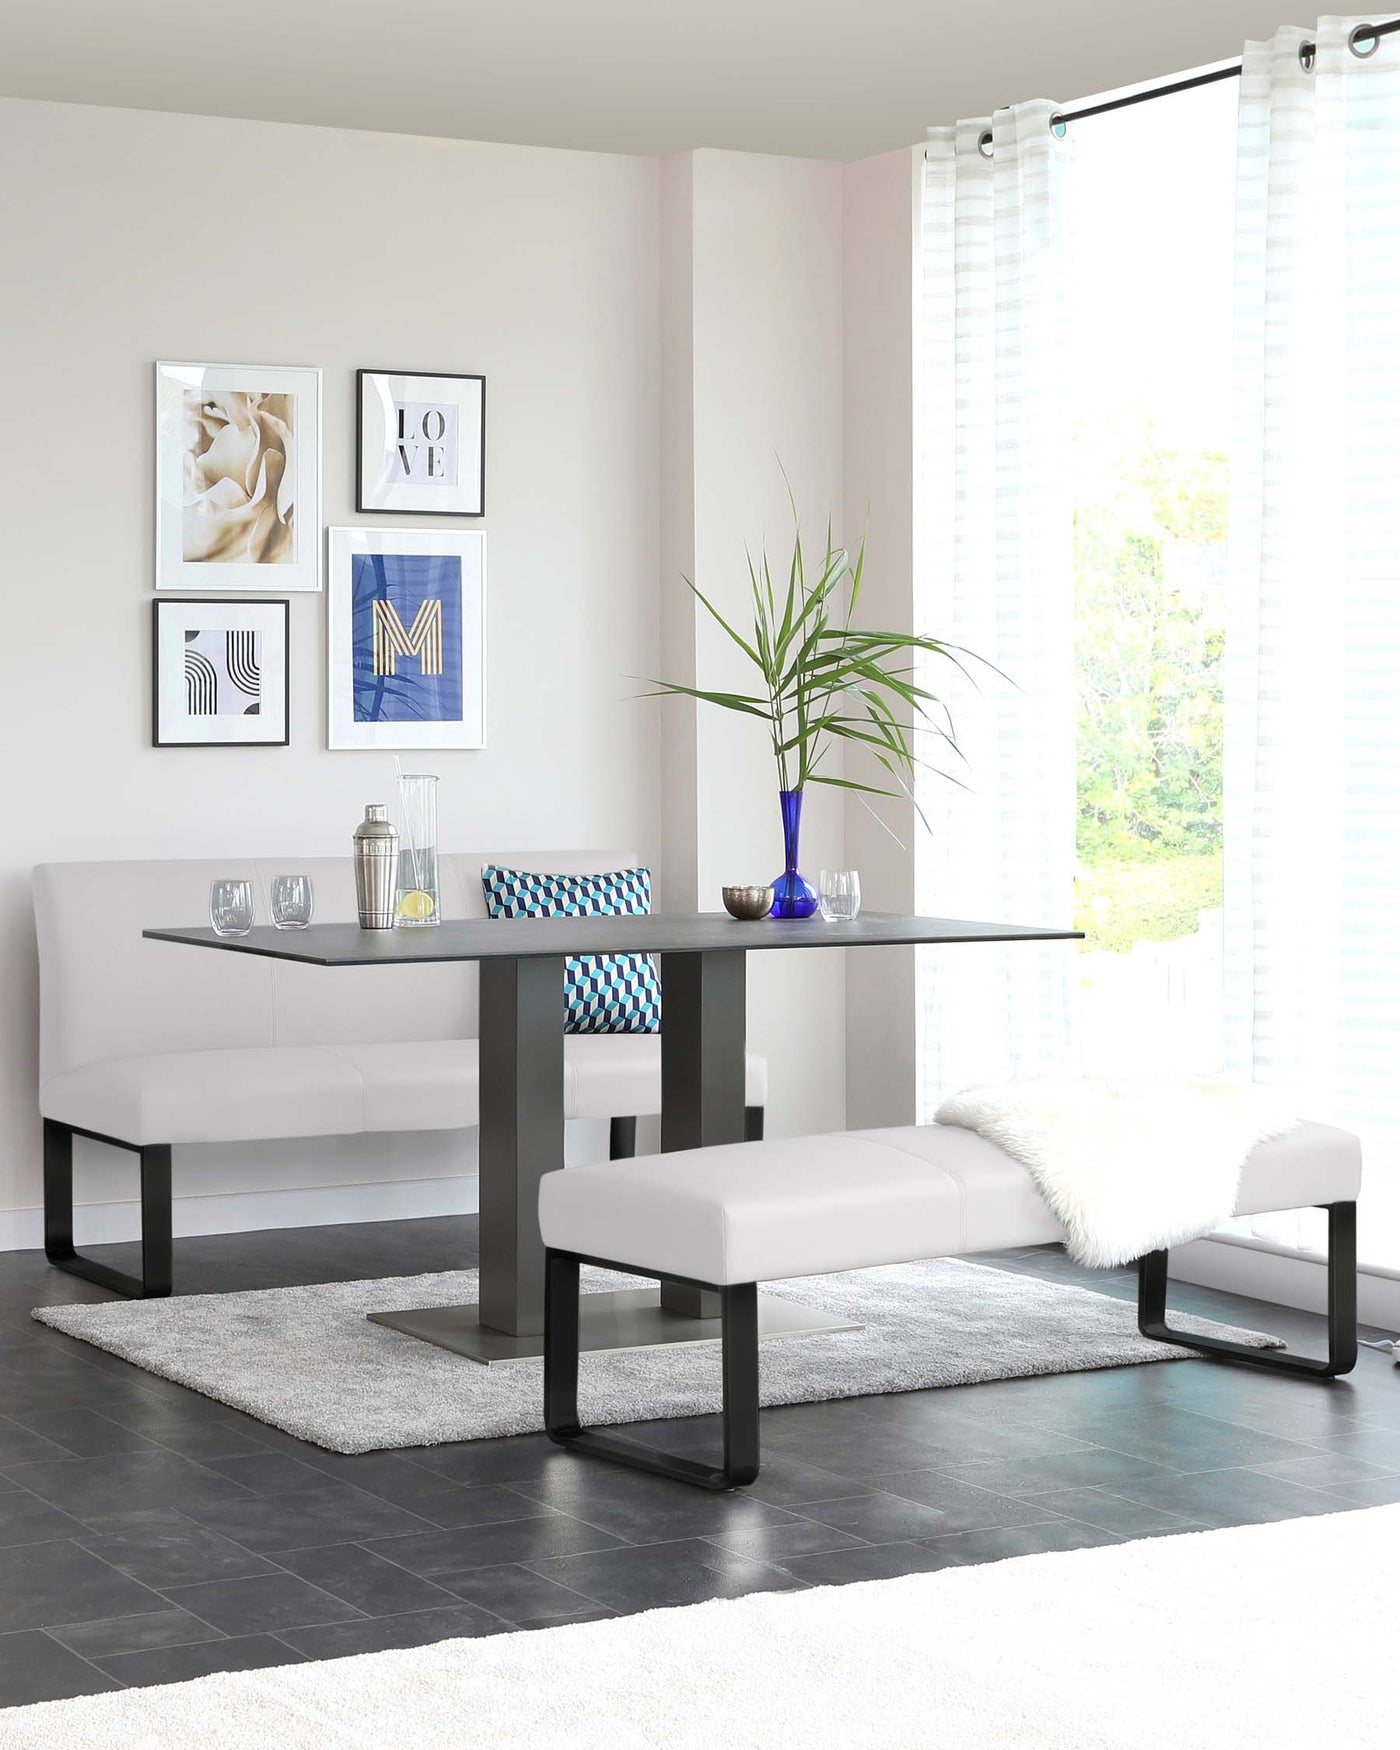 Modern minimalist dining furniture set featuring a sleek black dining table with a rectangular top and metal base paired with a matching bench and a padded backless bench. A white fluffy throw is draped over one end of the backless bench, complementing the light neutral colour scheme of the room.